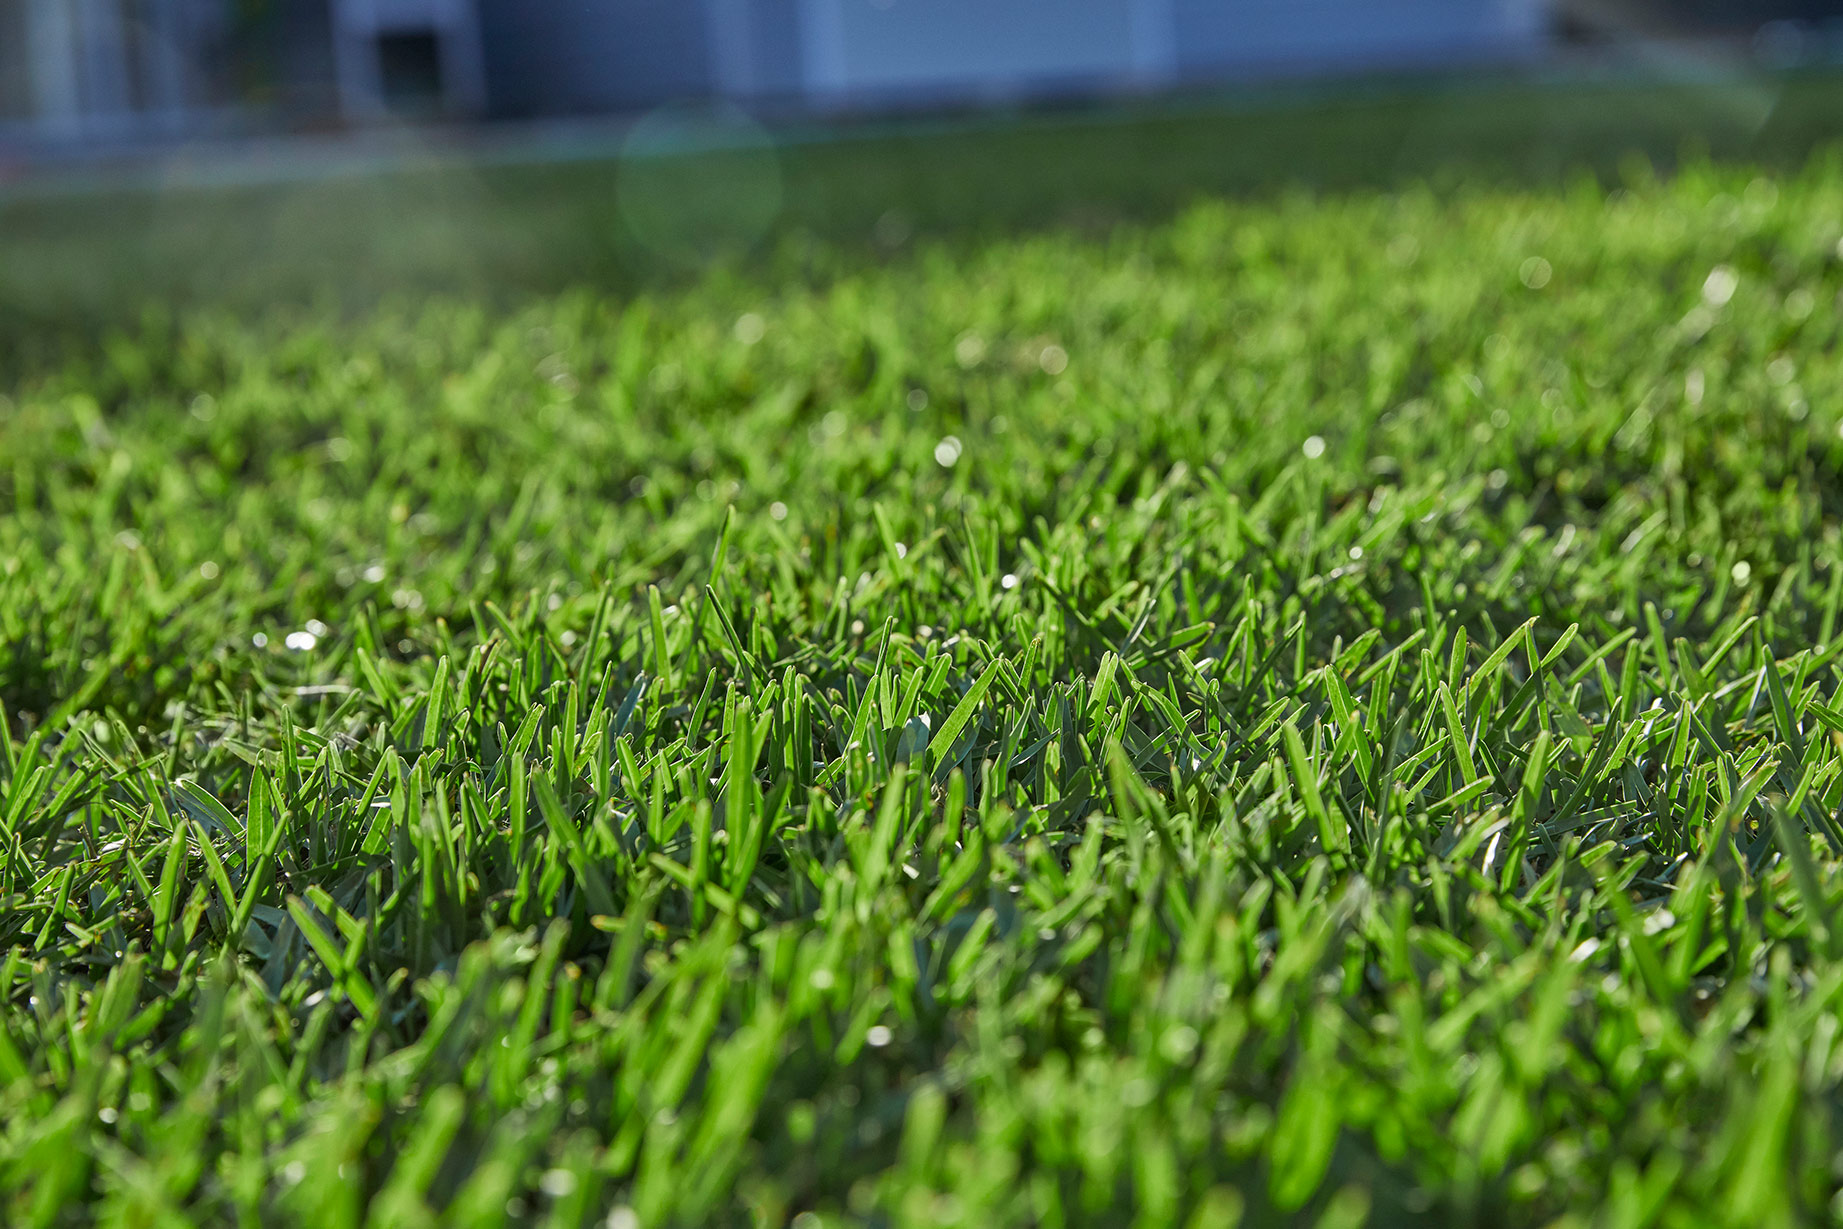 Natural Grass Vs Artificial Turf / Natural vs Artificial: which is better? | J&B Buffalo Turf ... : Natural grass requires several hours of work each week to keep it looking its best.